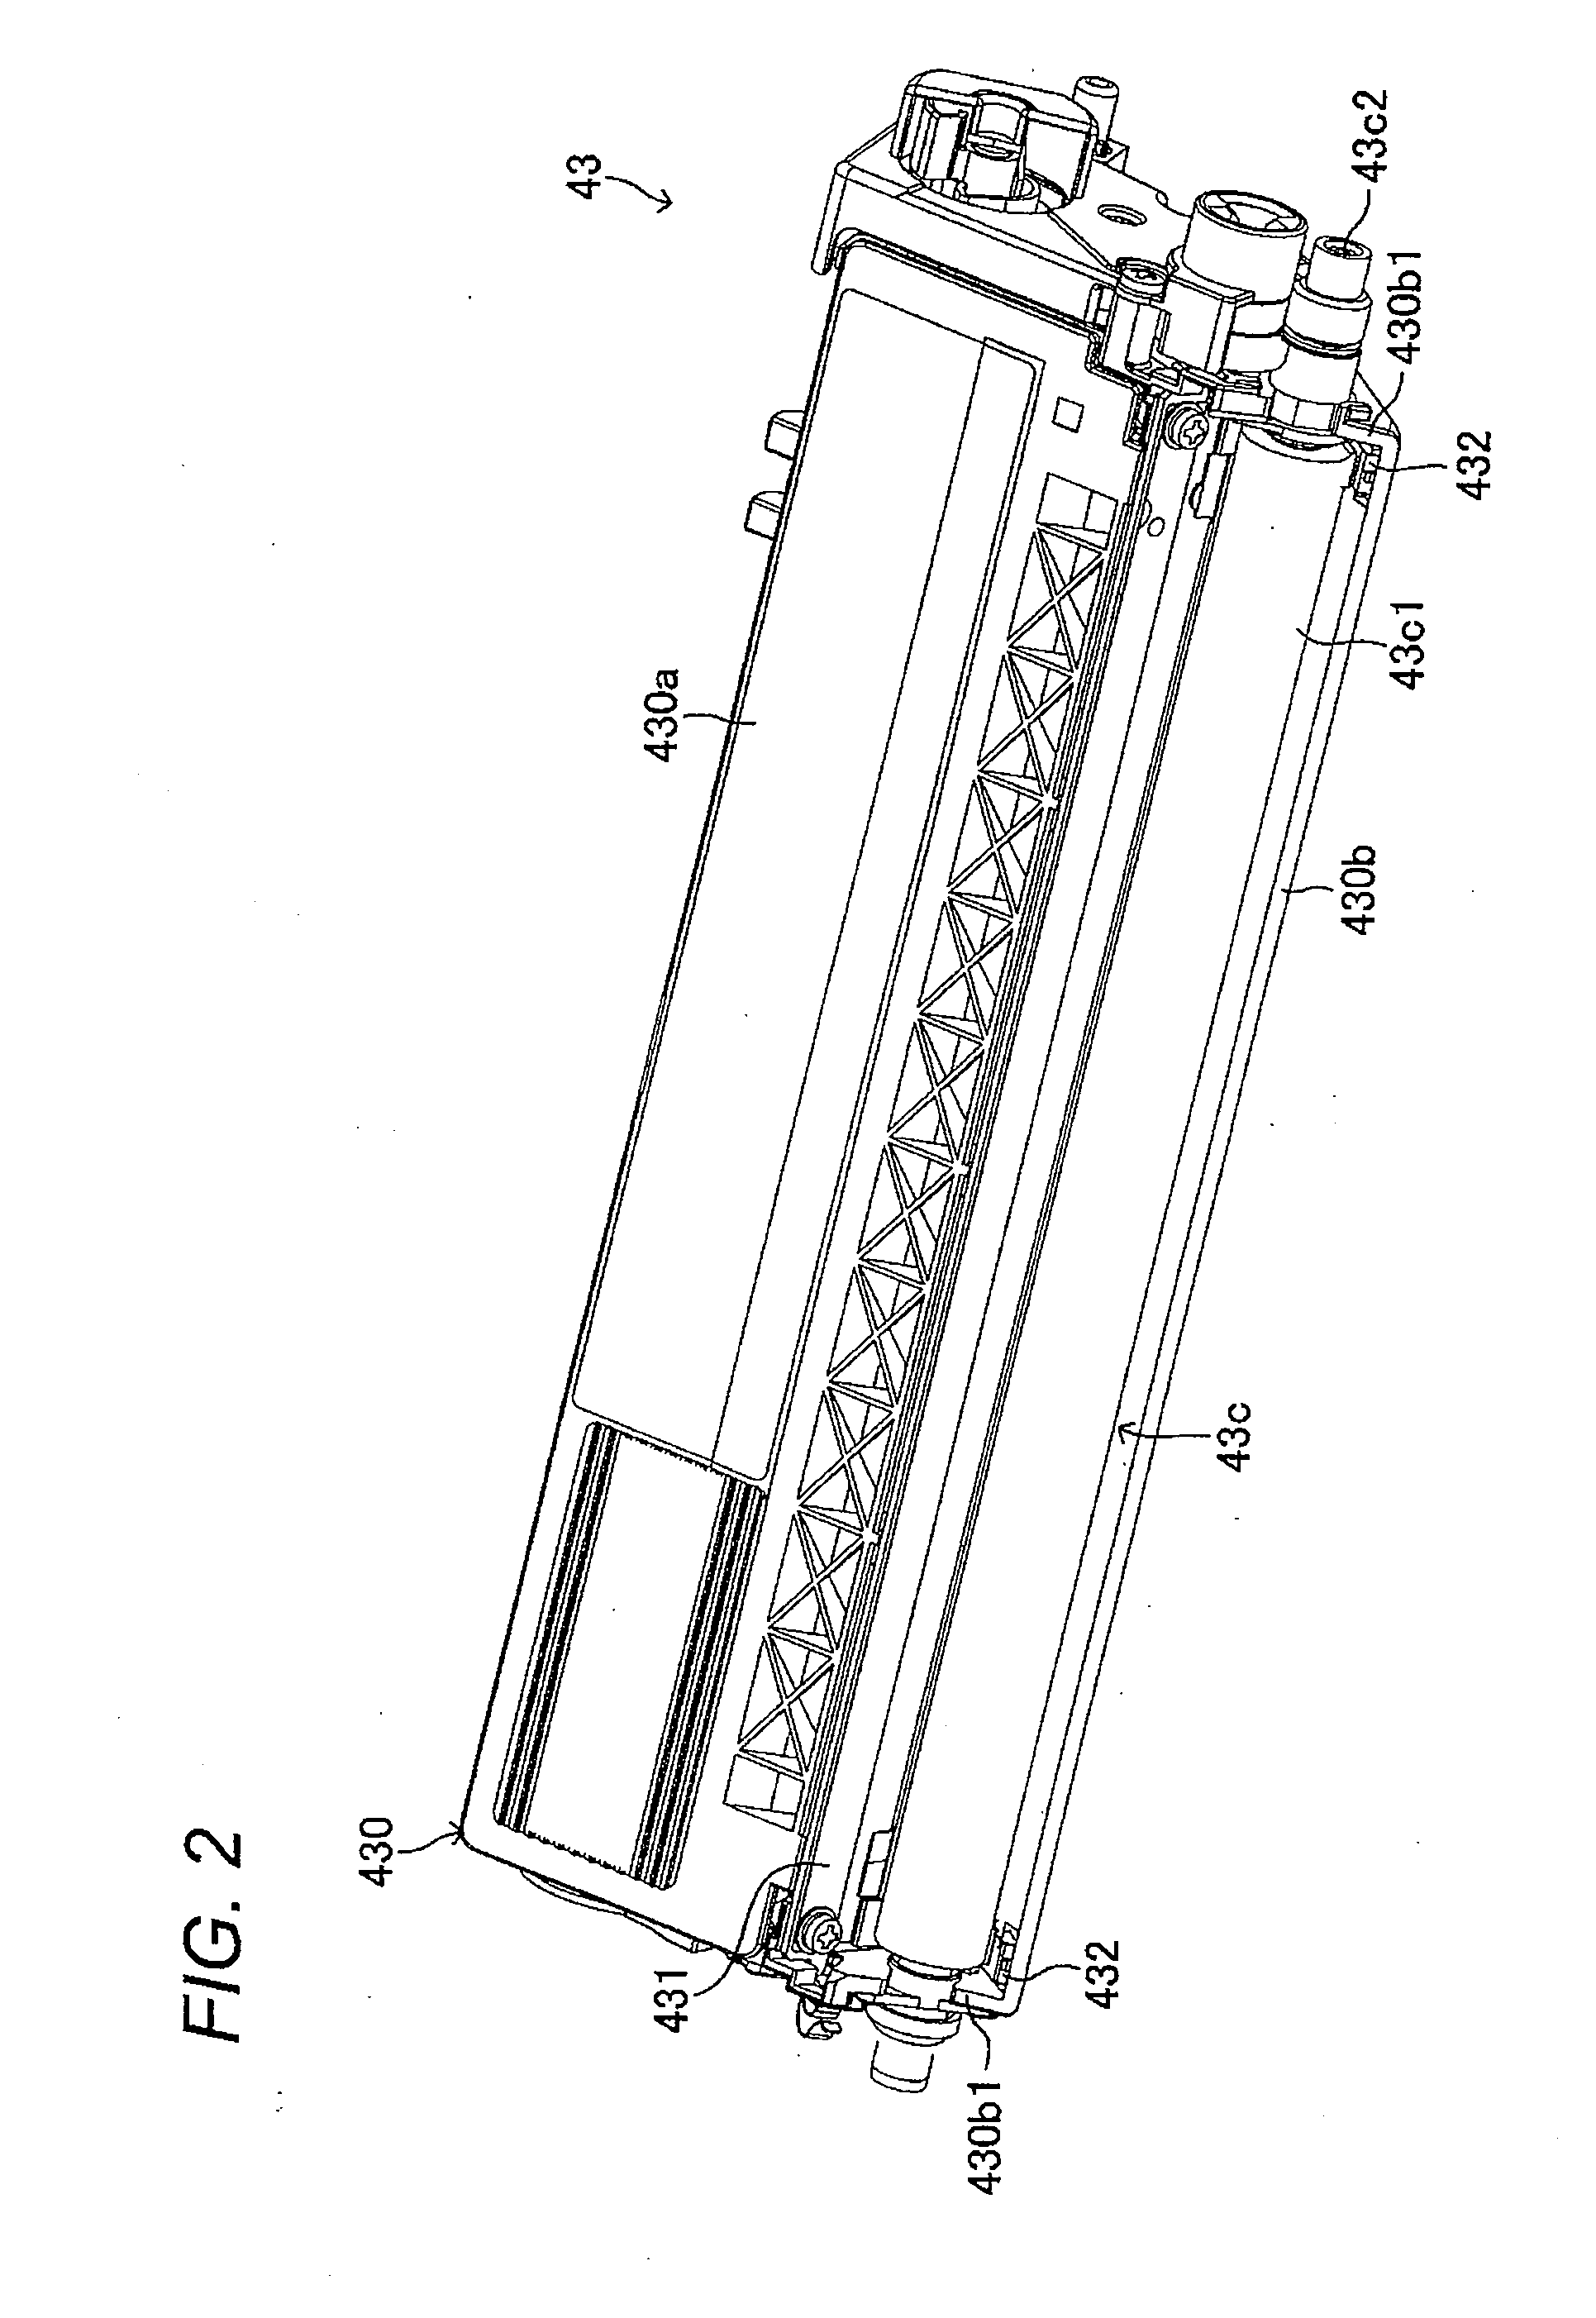 Casing Projections of an Image Forming Apparatus Configured to Support a Seal of a Developing Device